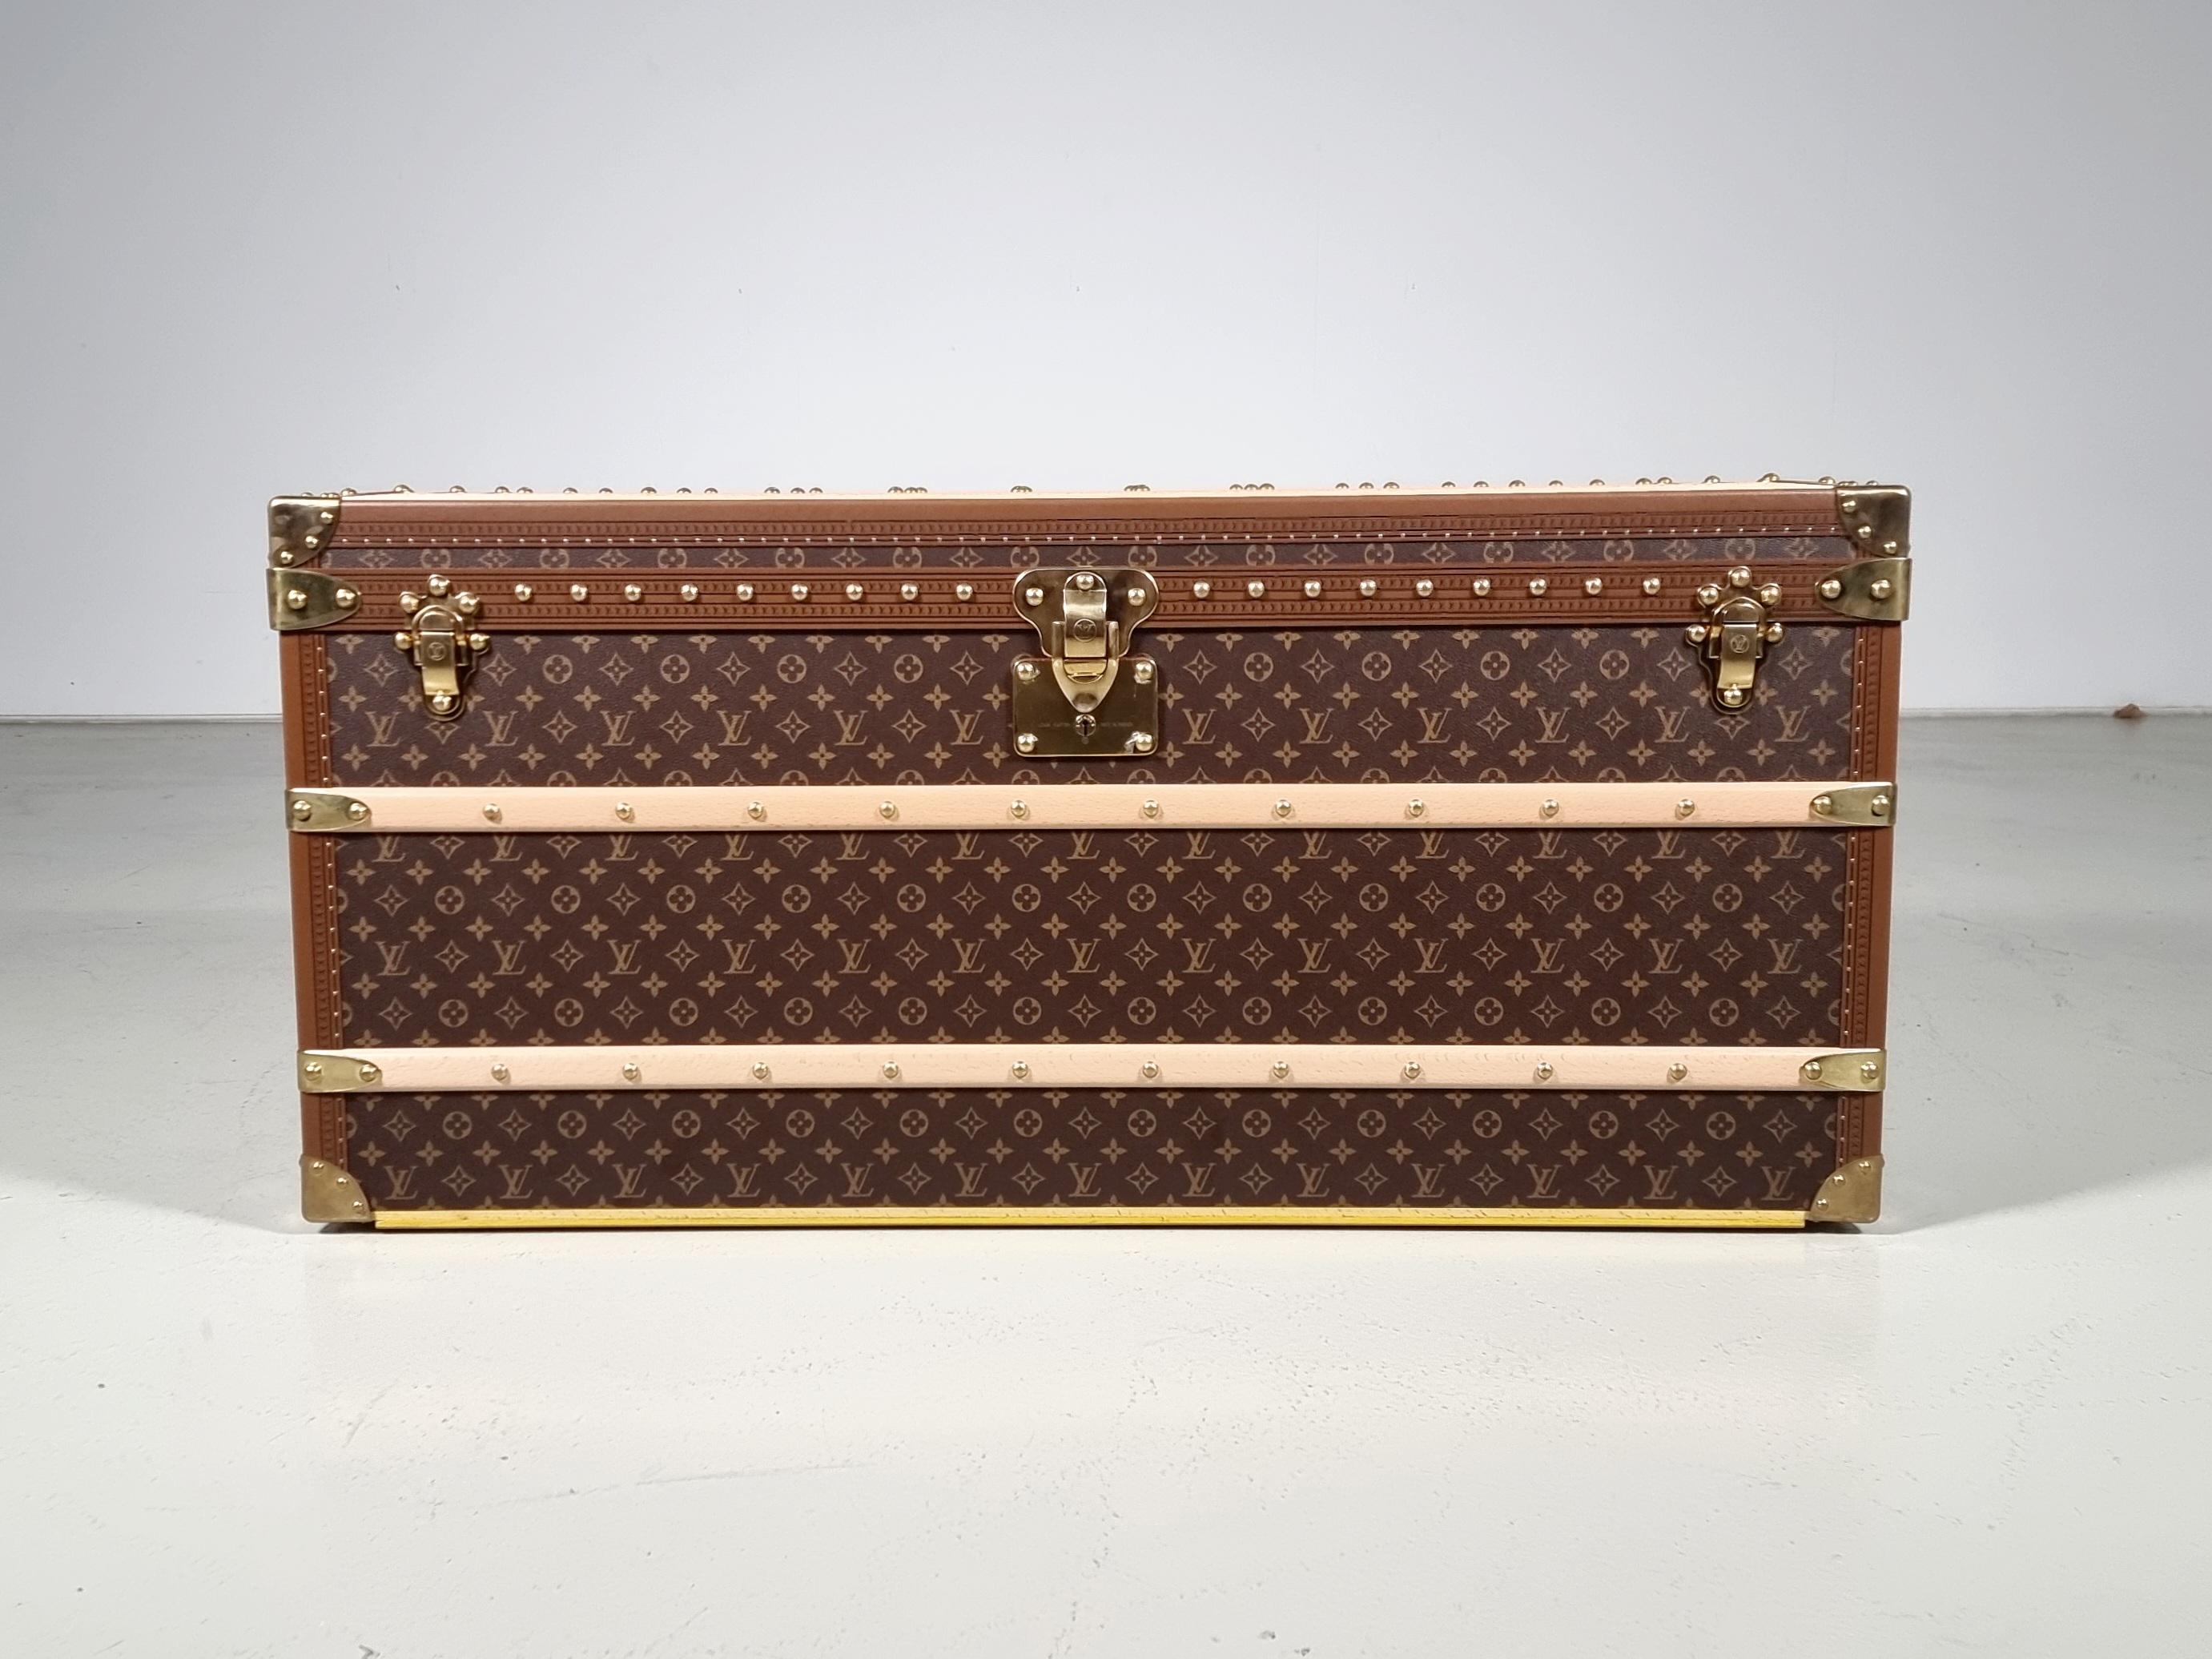 The noble traditions of Louis Vuitton trunk craftsmanship and savoir-faire are perpetuated in the Lozine Courrier 110. A rich and sophisticated hard case protects plush interiors. The waiting list at Louis Vuitton for this item is more than a